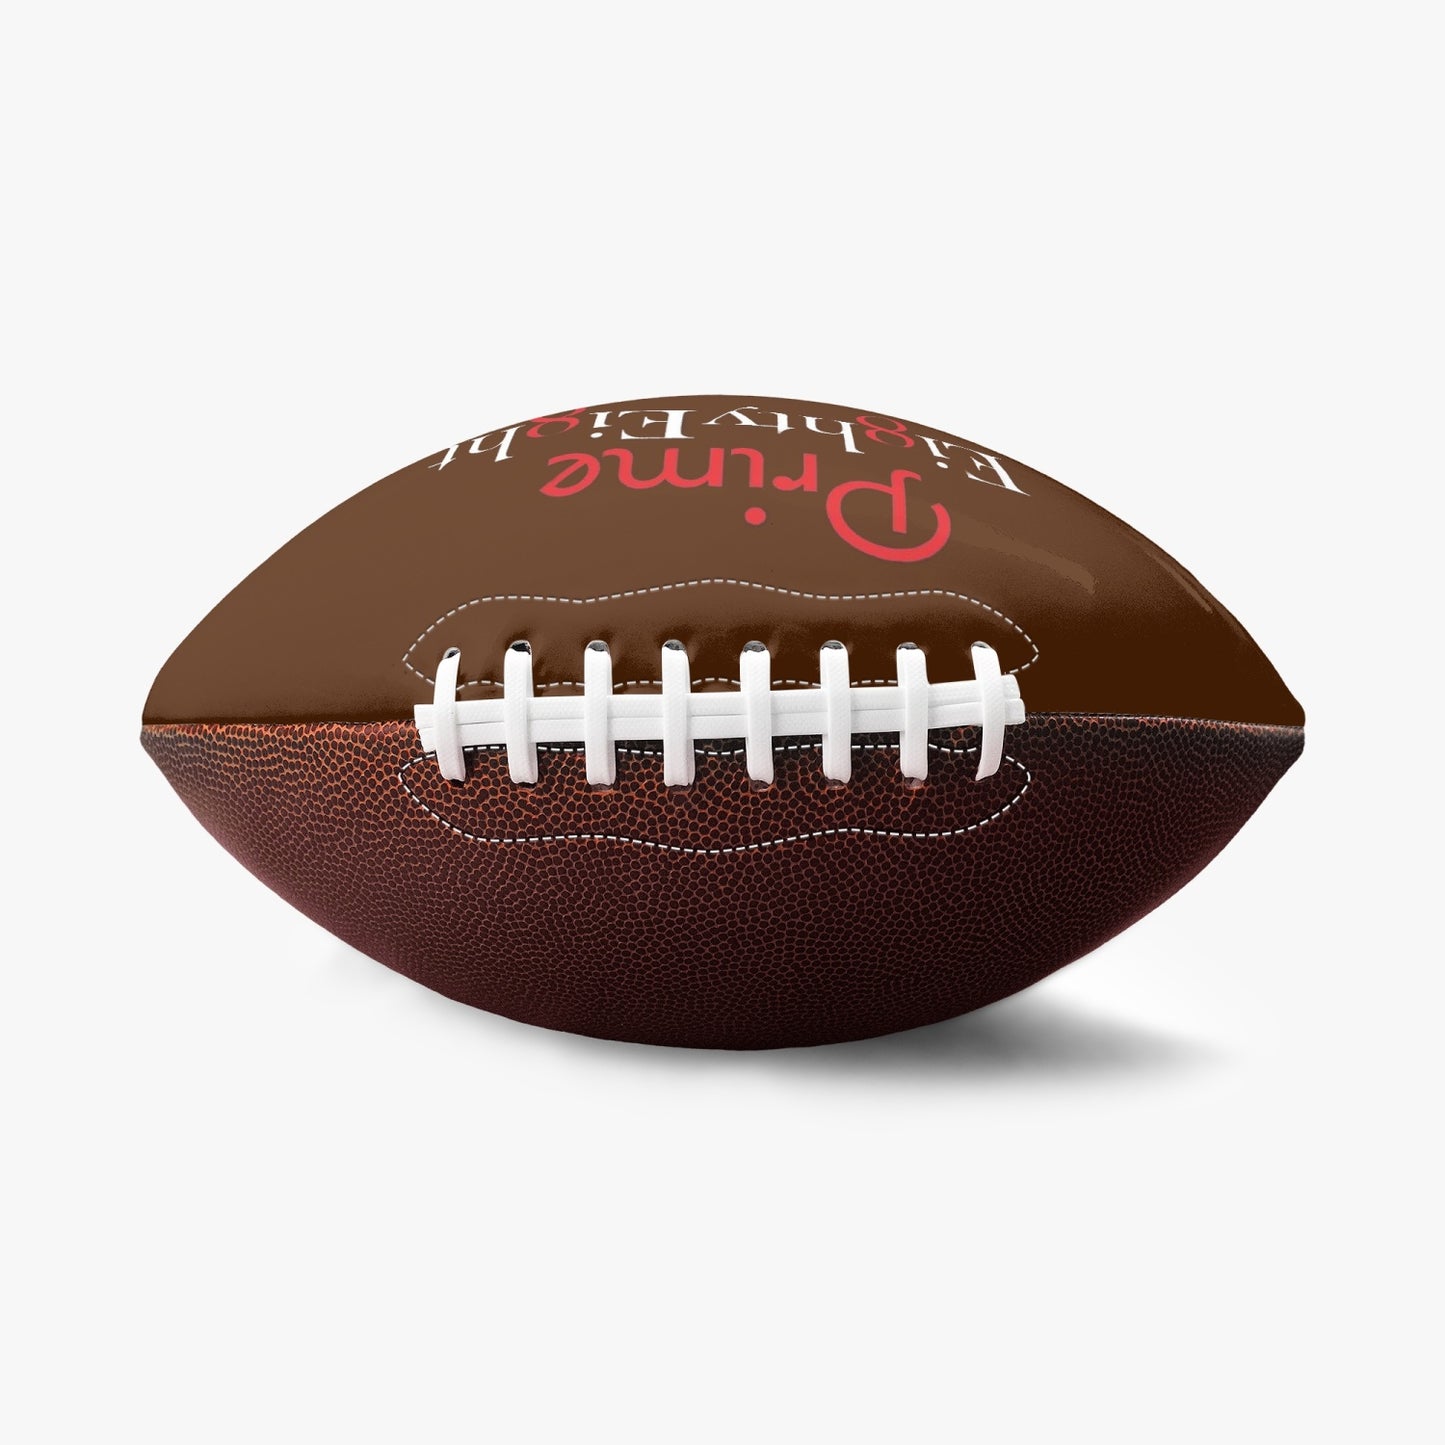 Official Size NFL football - Prime 88 version #2